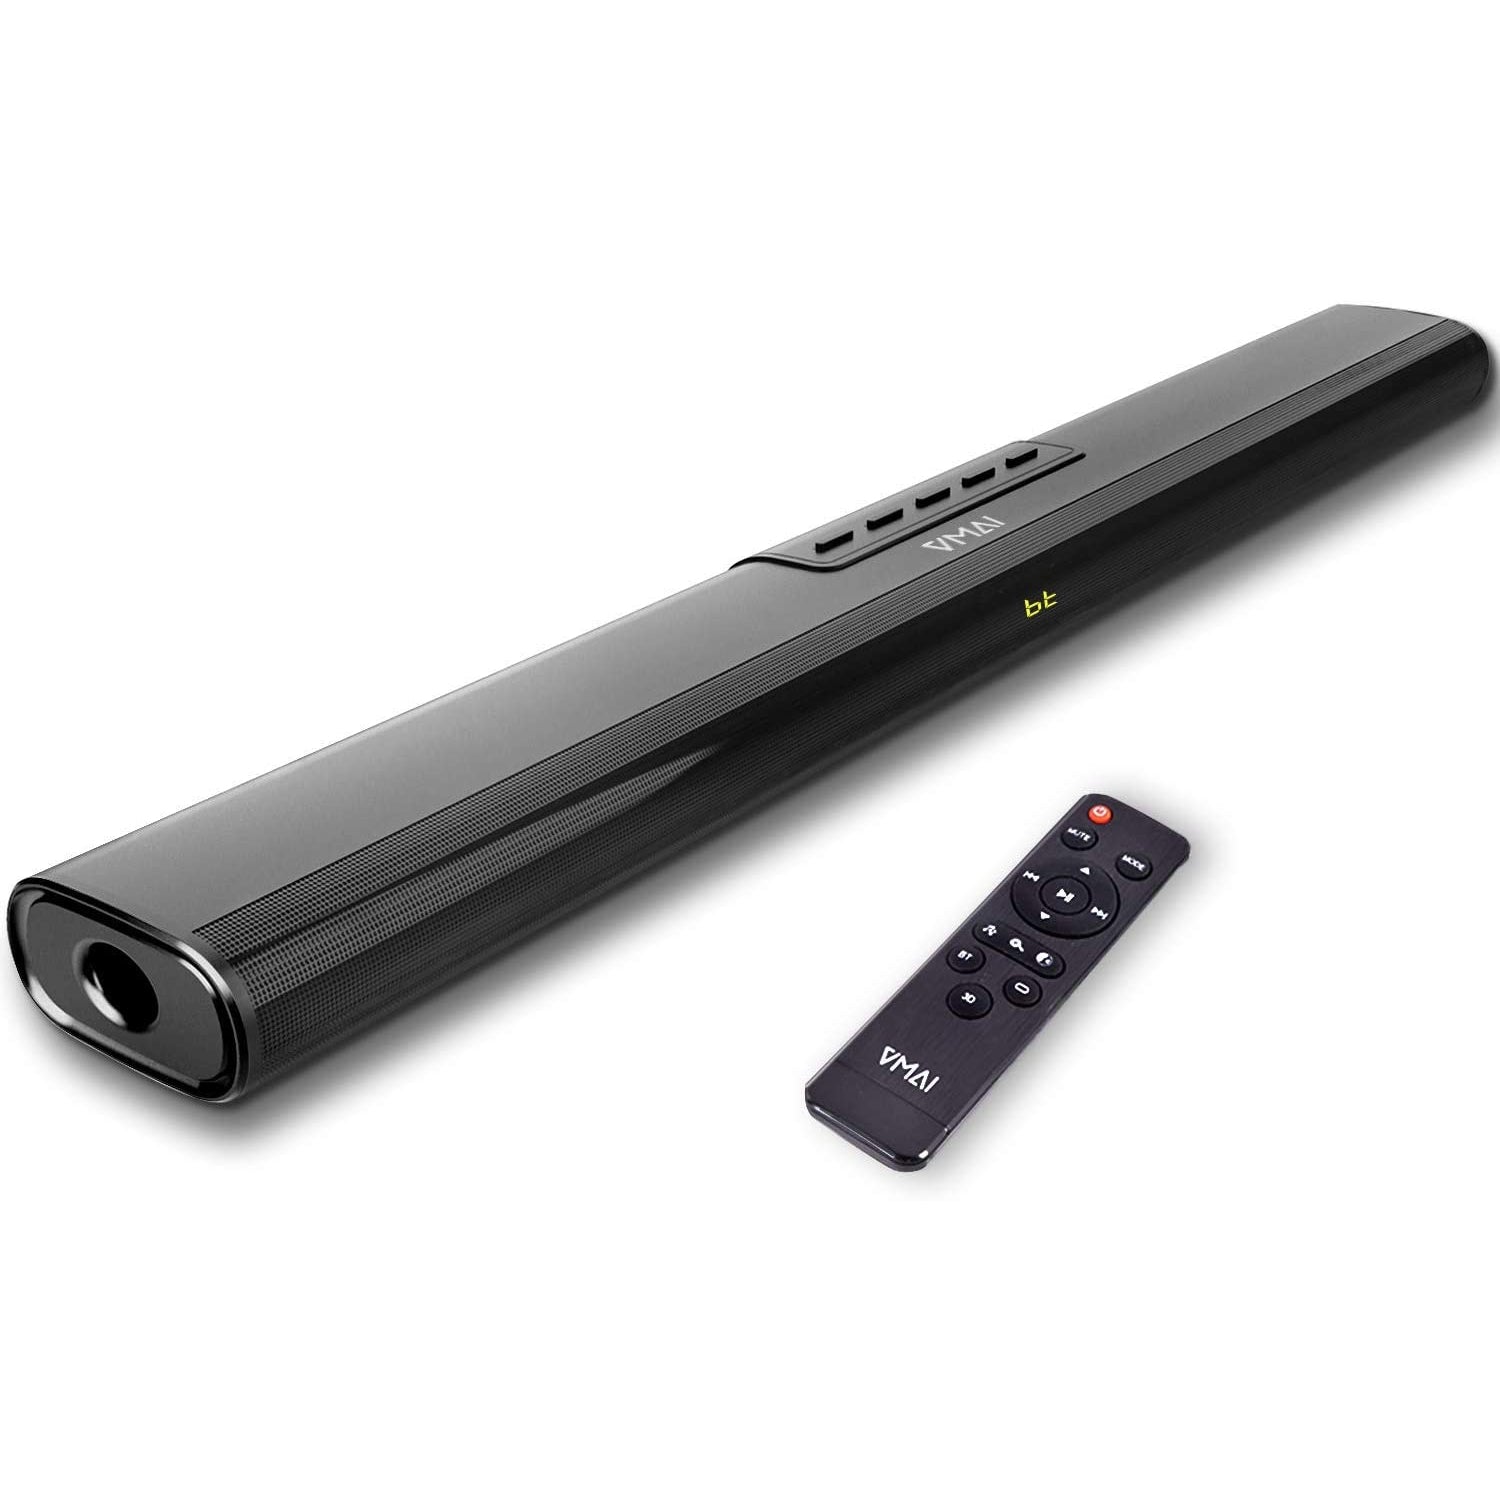 VMAI Soundbar with Built-in Subwoofer, Wired & Wireless Bluetooth 5.0 Speaker for TV